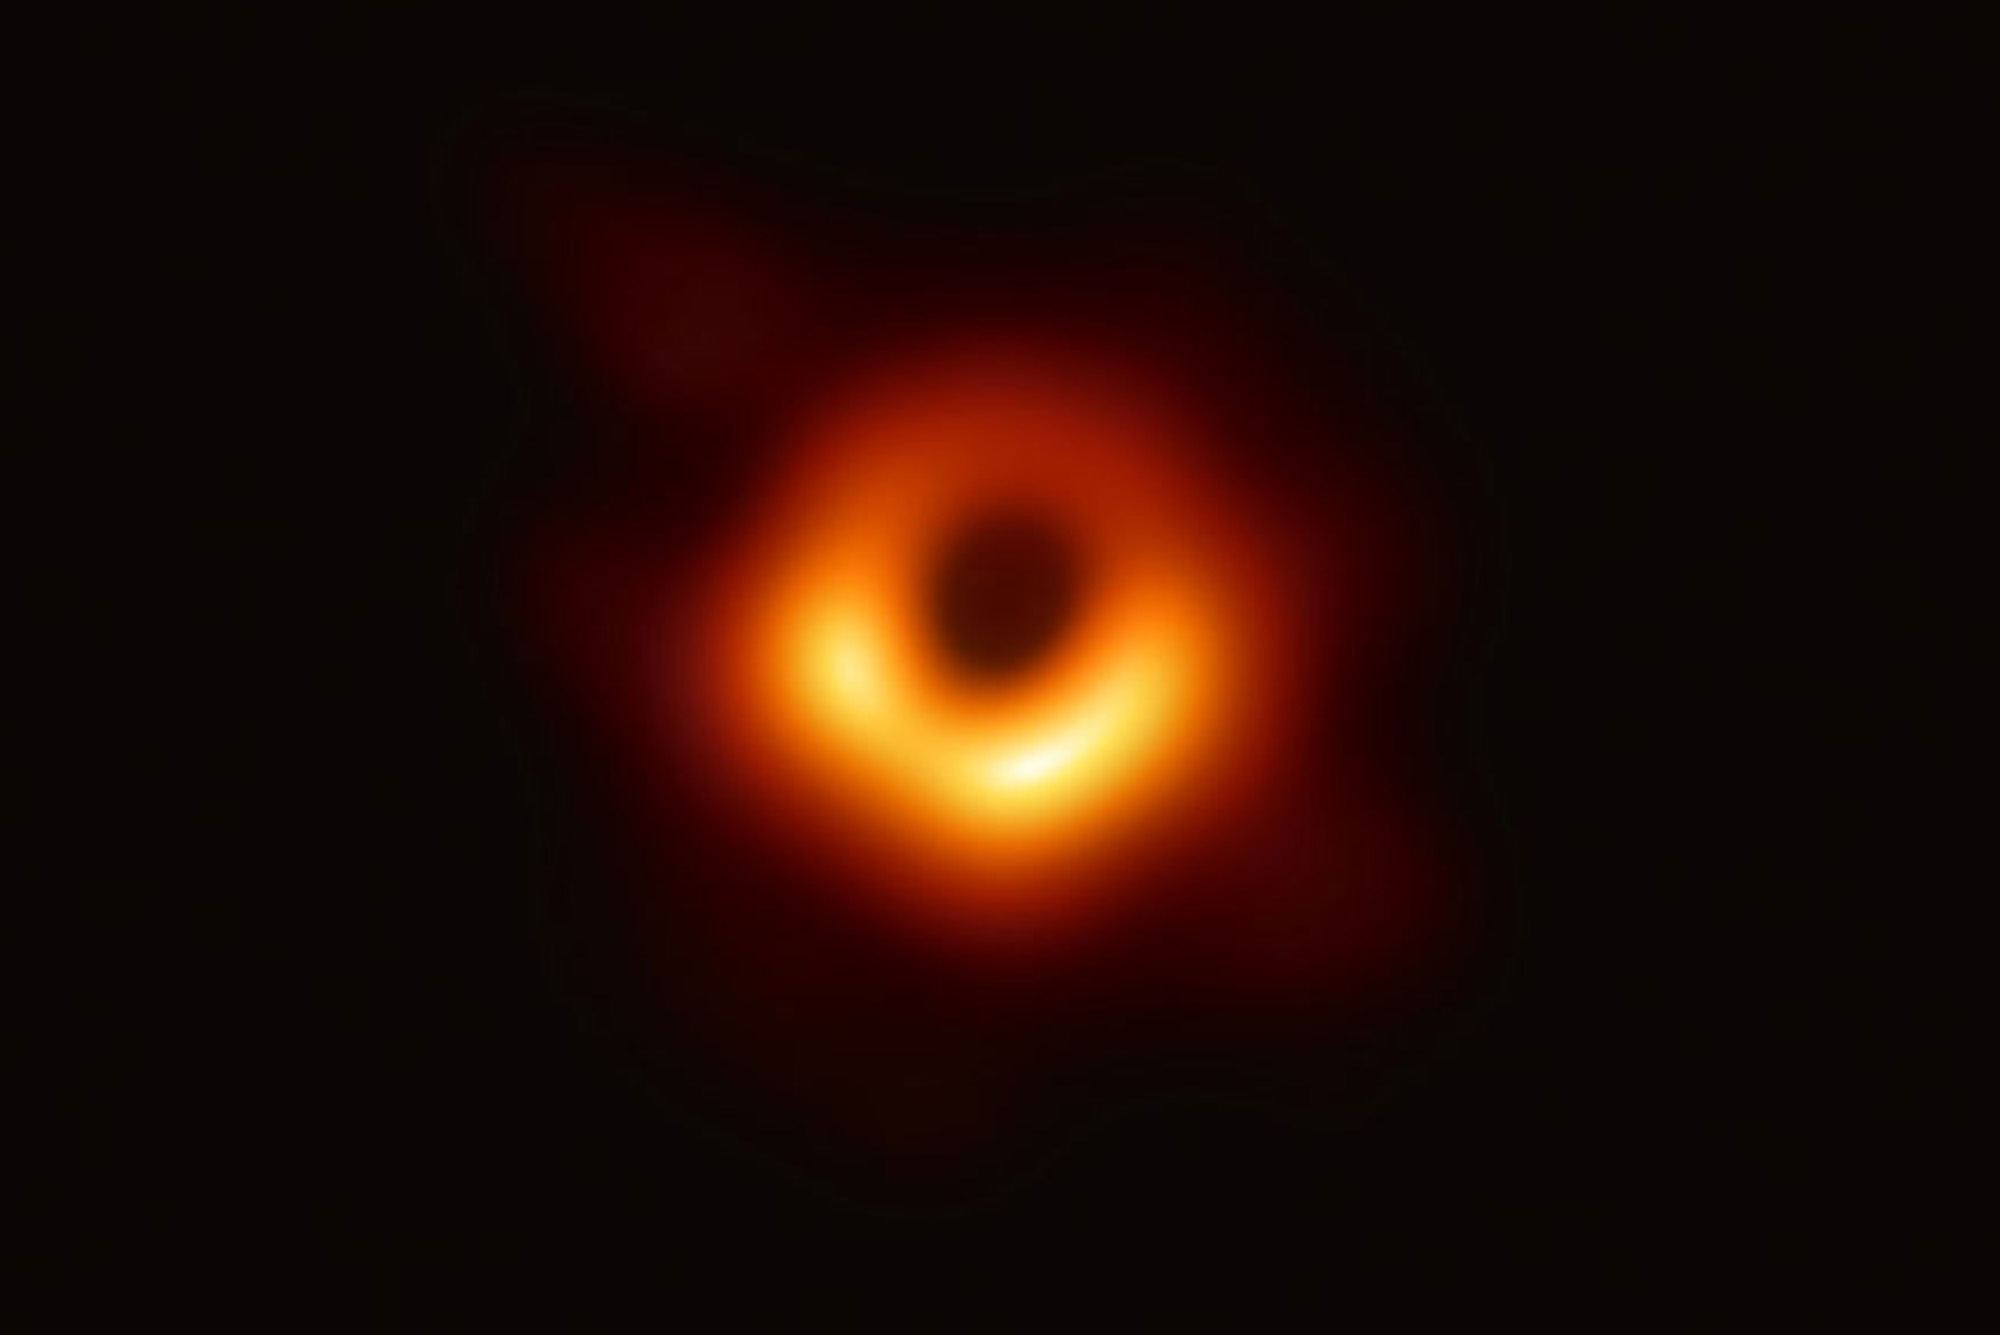 Photo: Early image of black hole. There is a ring of orange surrounded by darkness